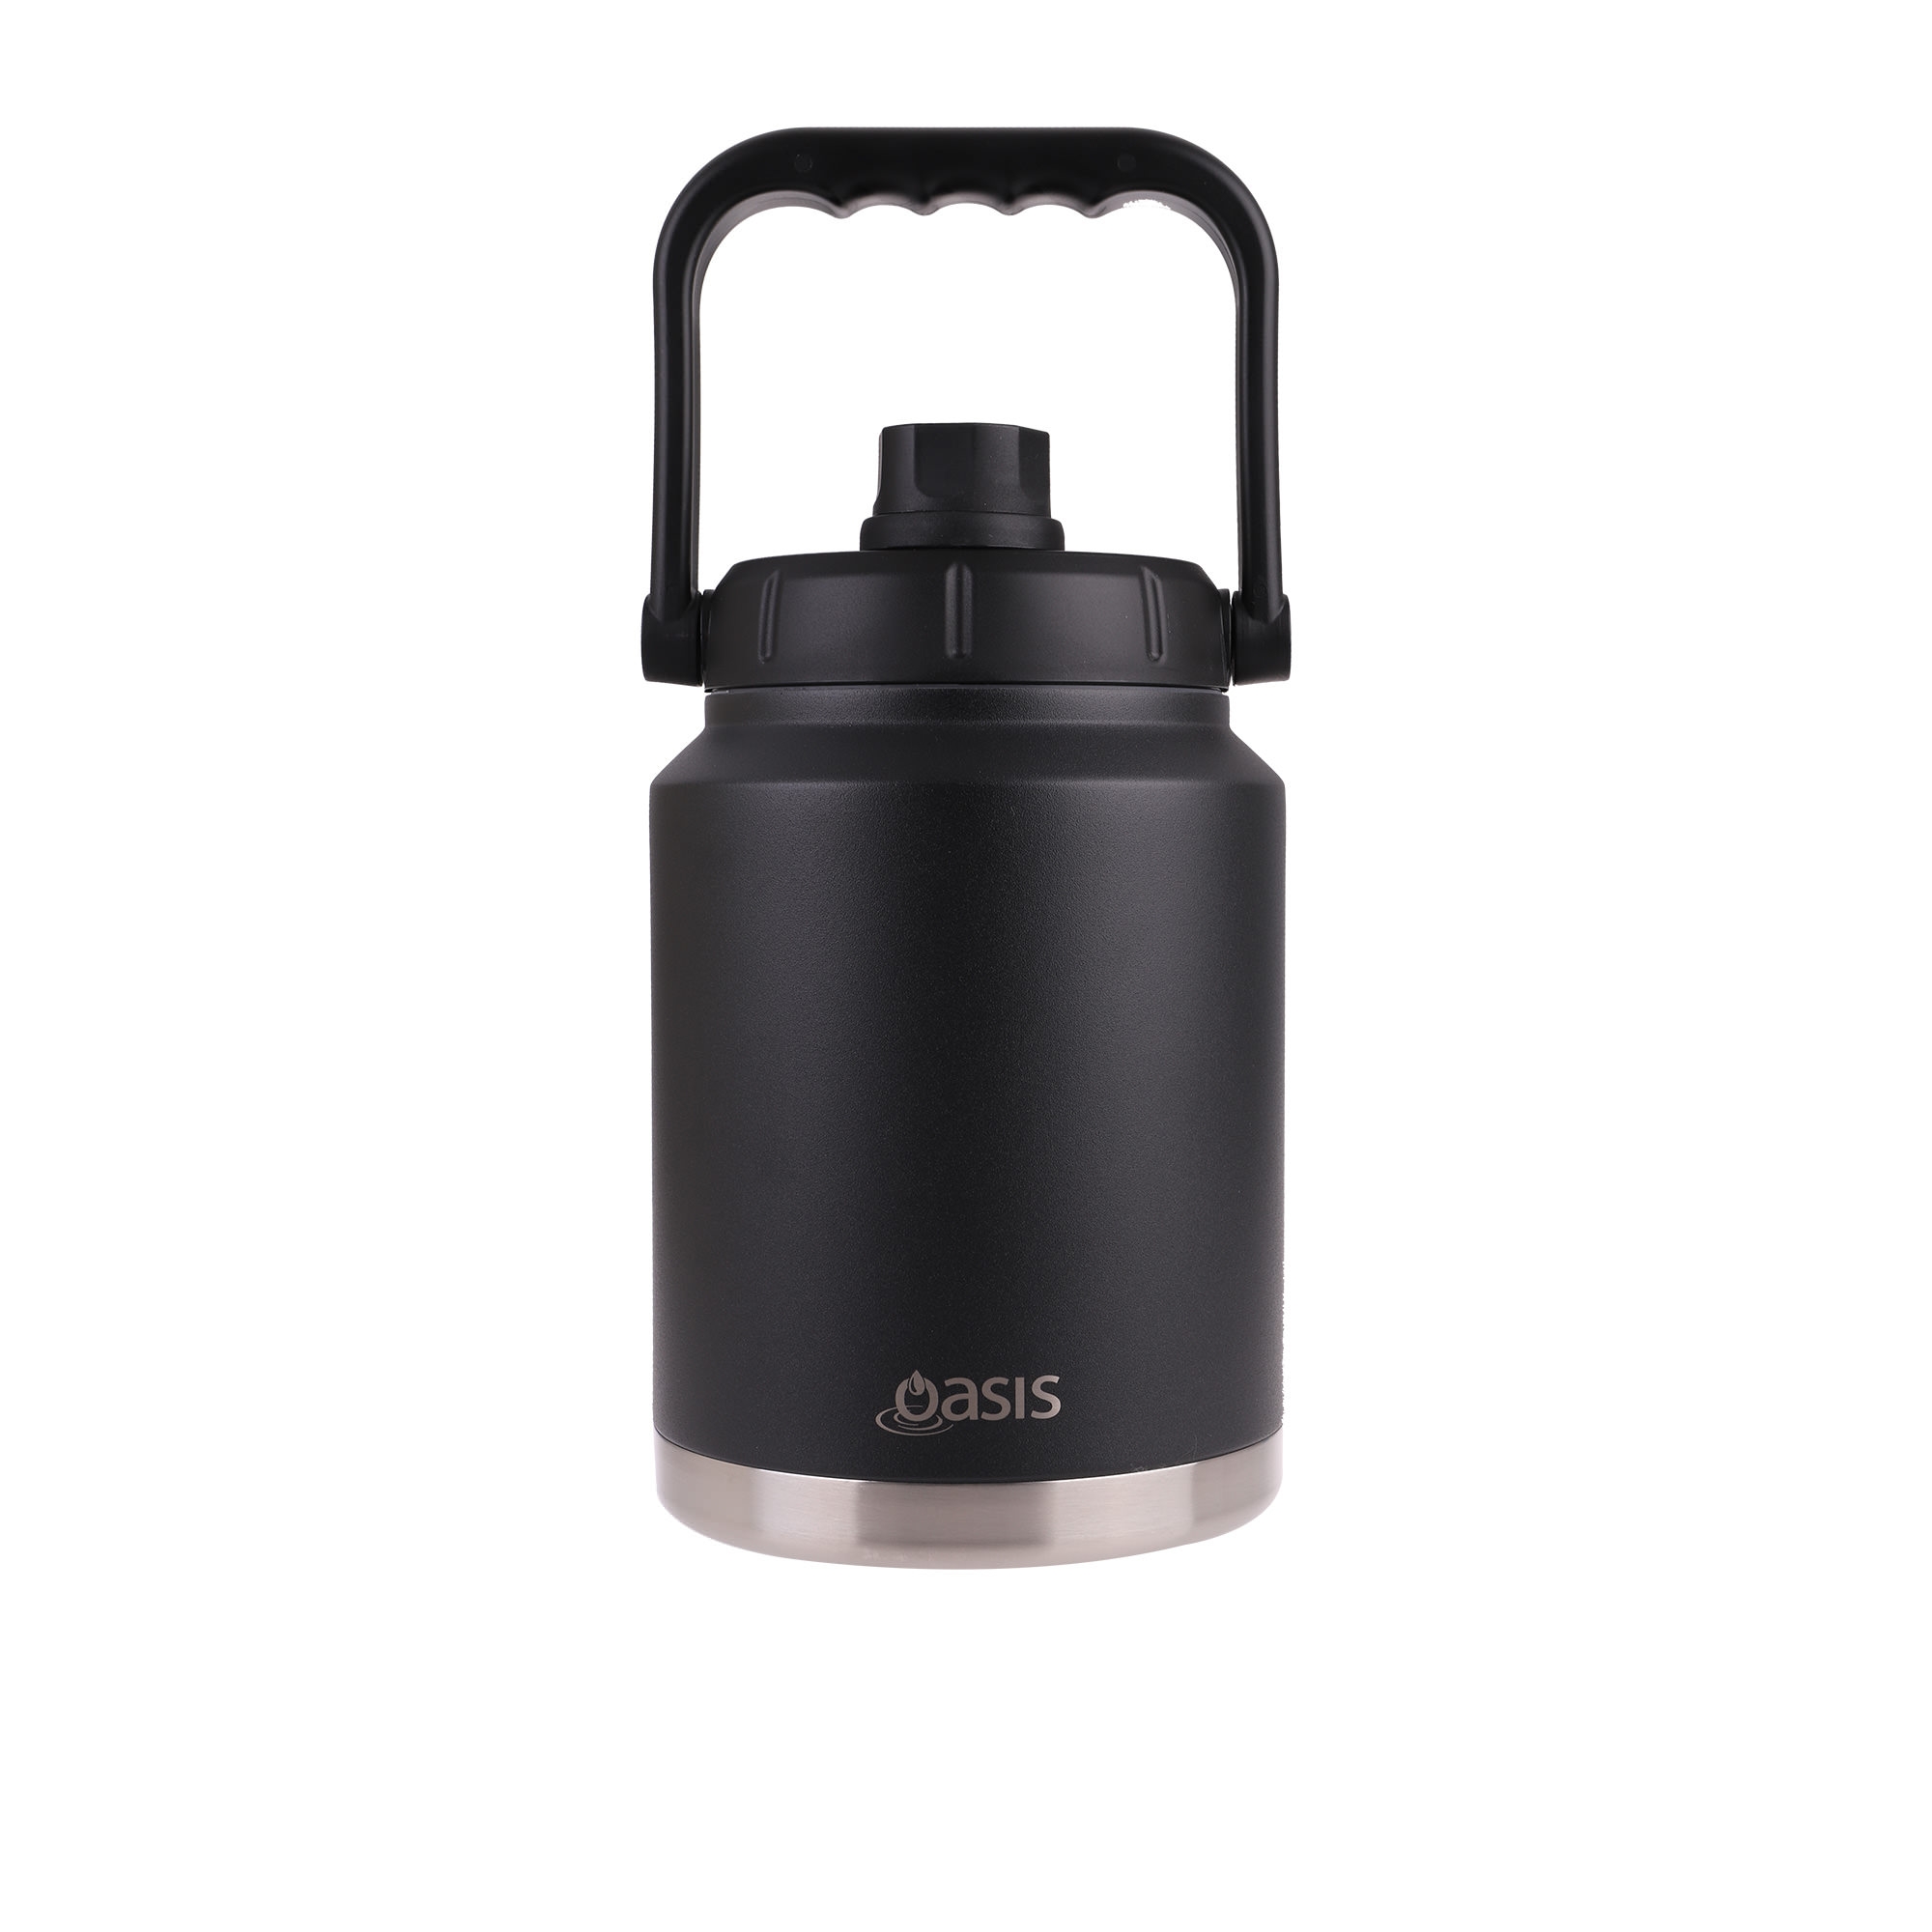 Oasis Insulated Jug with Carry Handle 2.1L Black Image 1